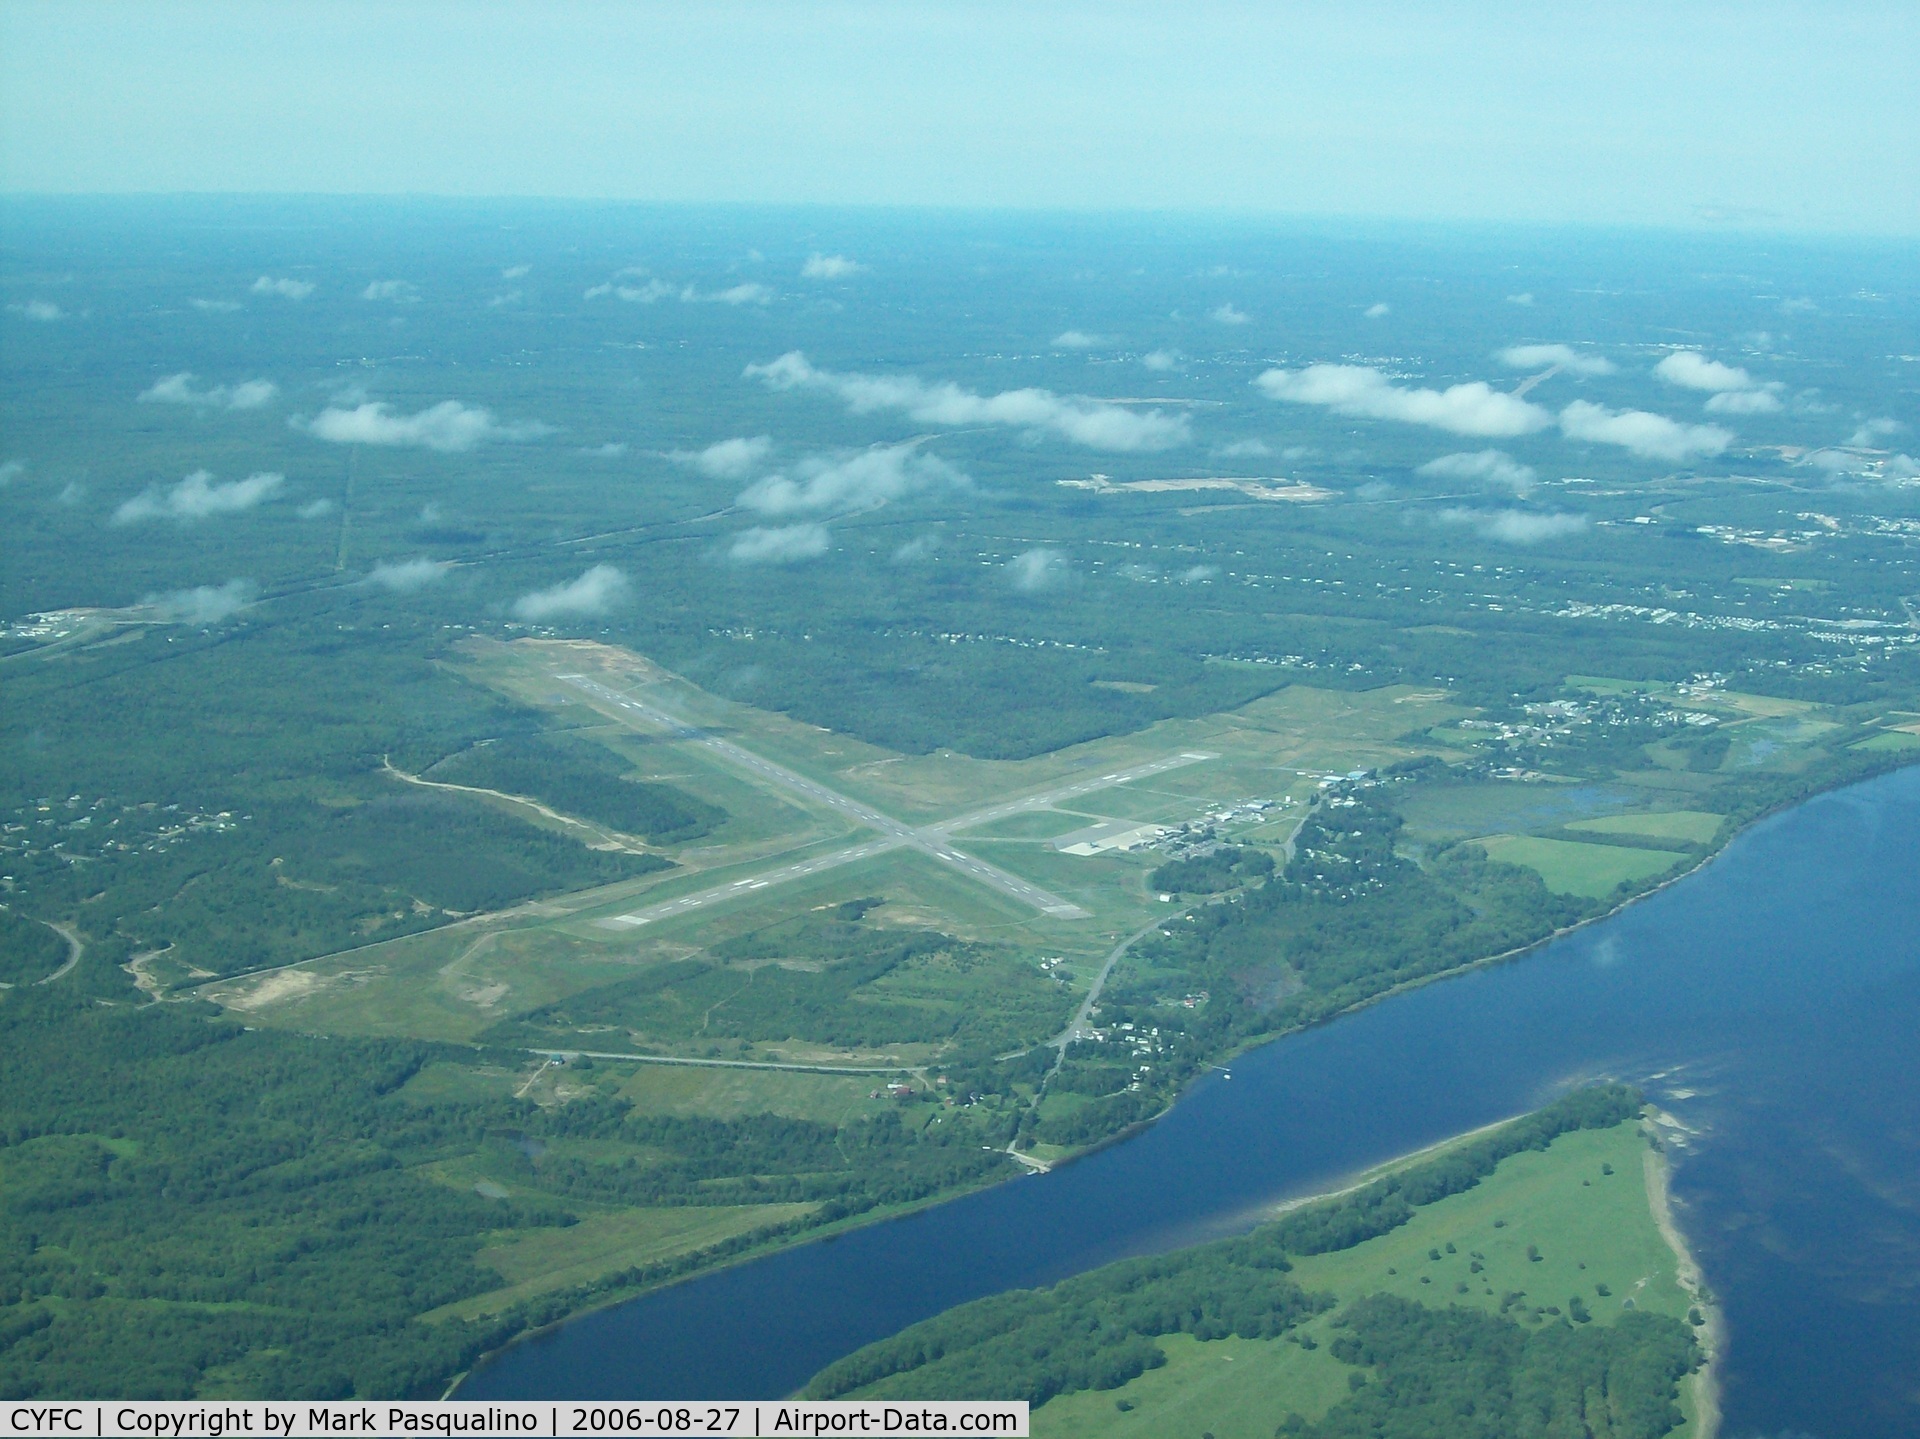 Greater Fredericton Airport (Fredericton International Airport), Fredericton, New Brunswick Canada (CYFC) - Fredricton, New Brunswick